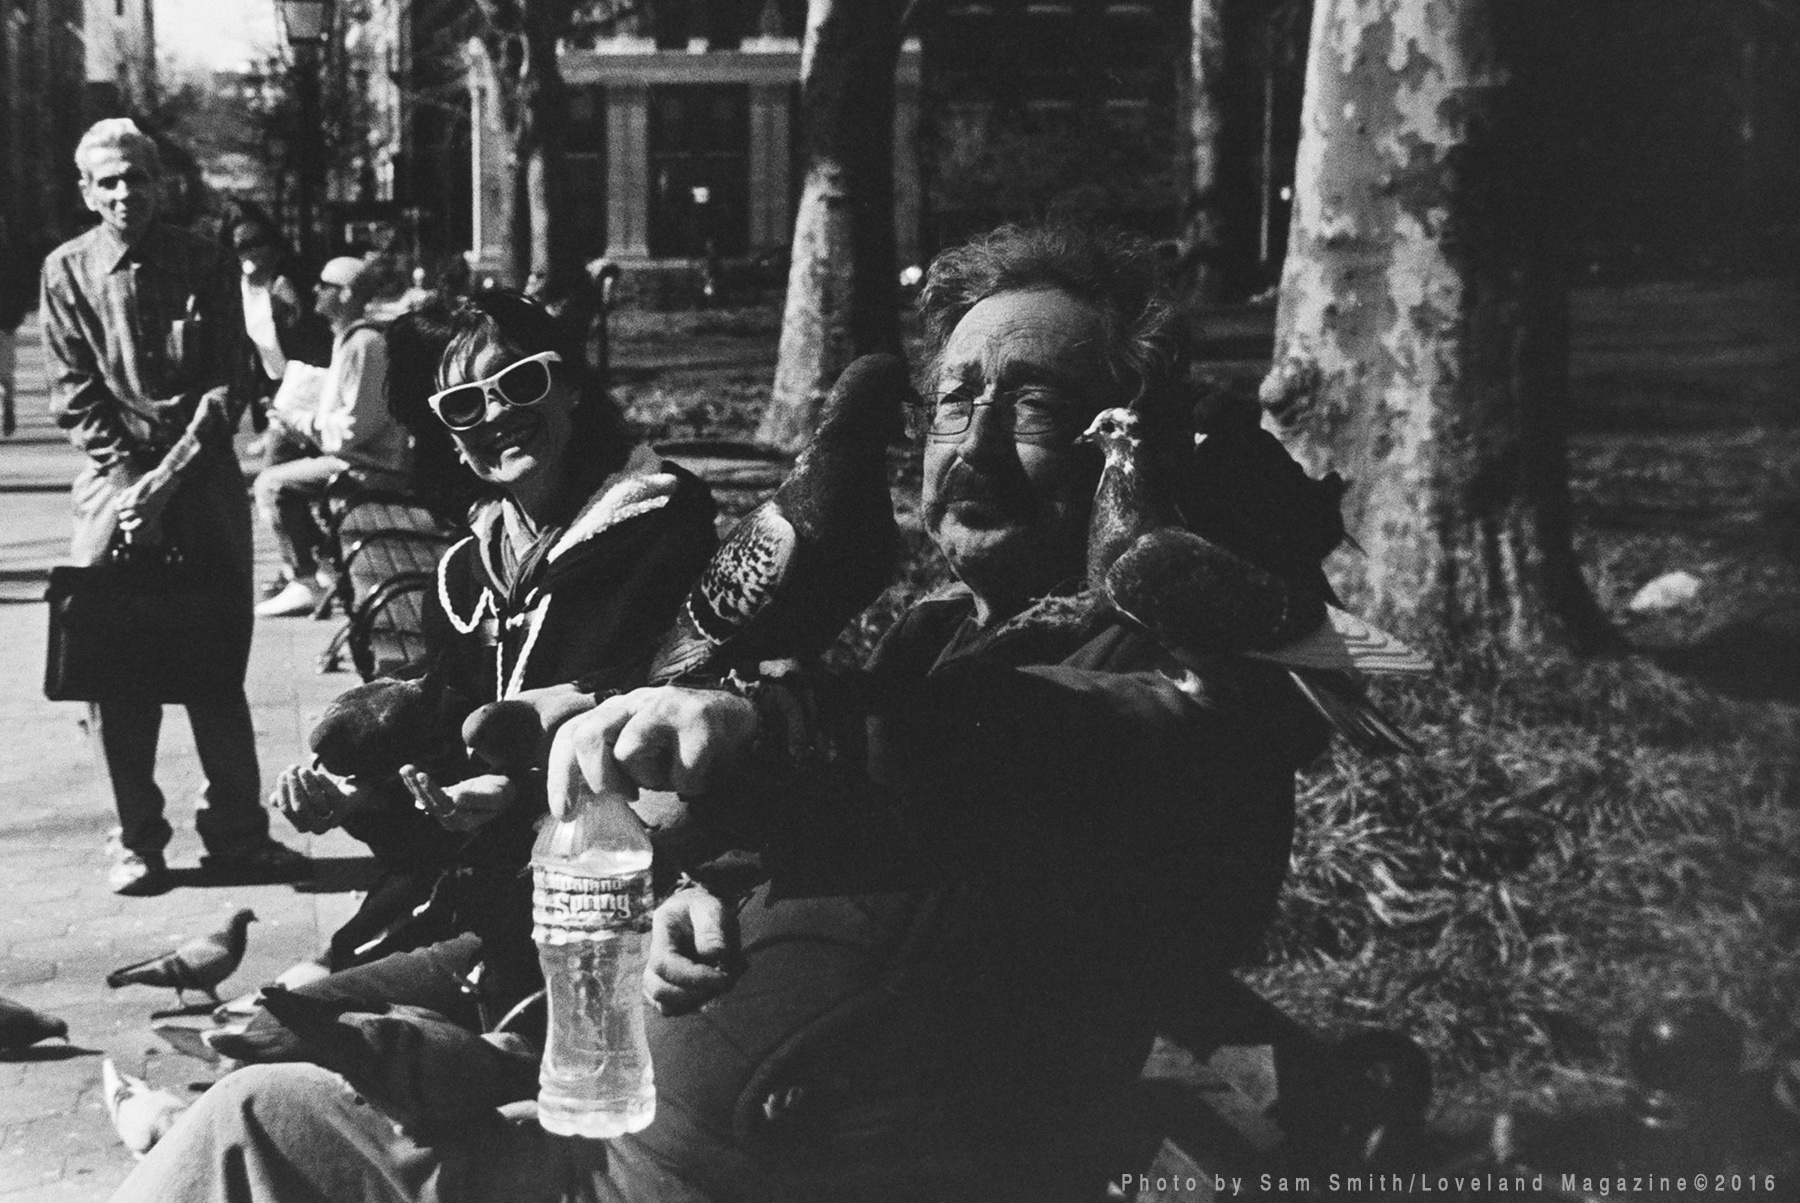 Pigeon Man in Central Park, developed in the Loveland Photo 1 room